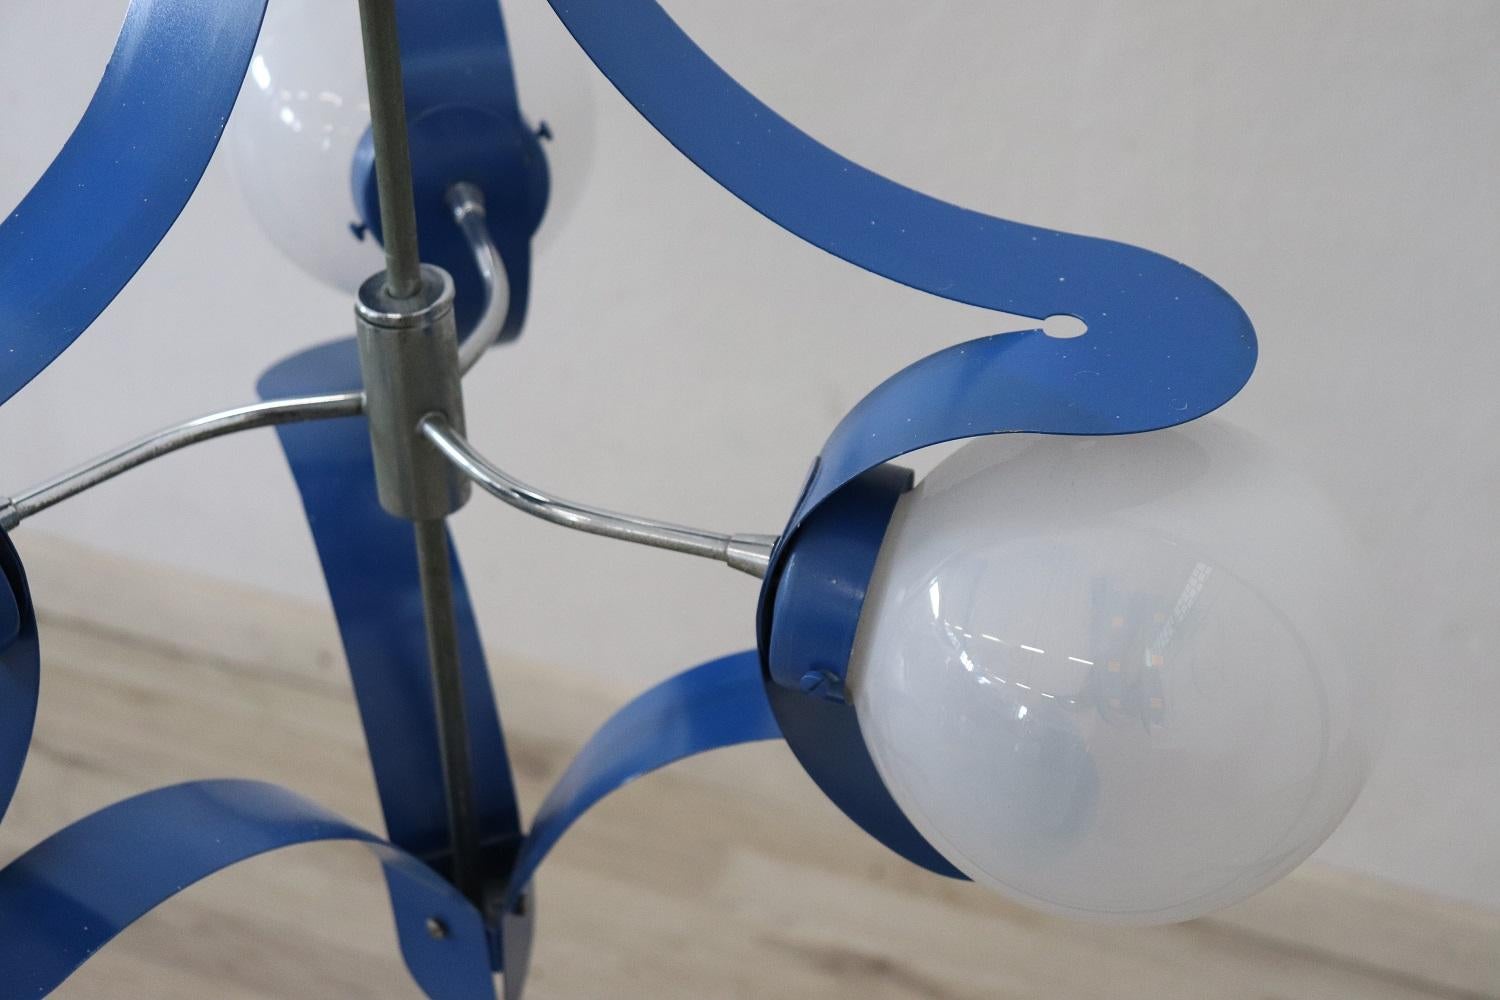 Italian Design Glass and Blue Lacquered Metal Stilnovo Style Chandelier, 1950s For Sale 1